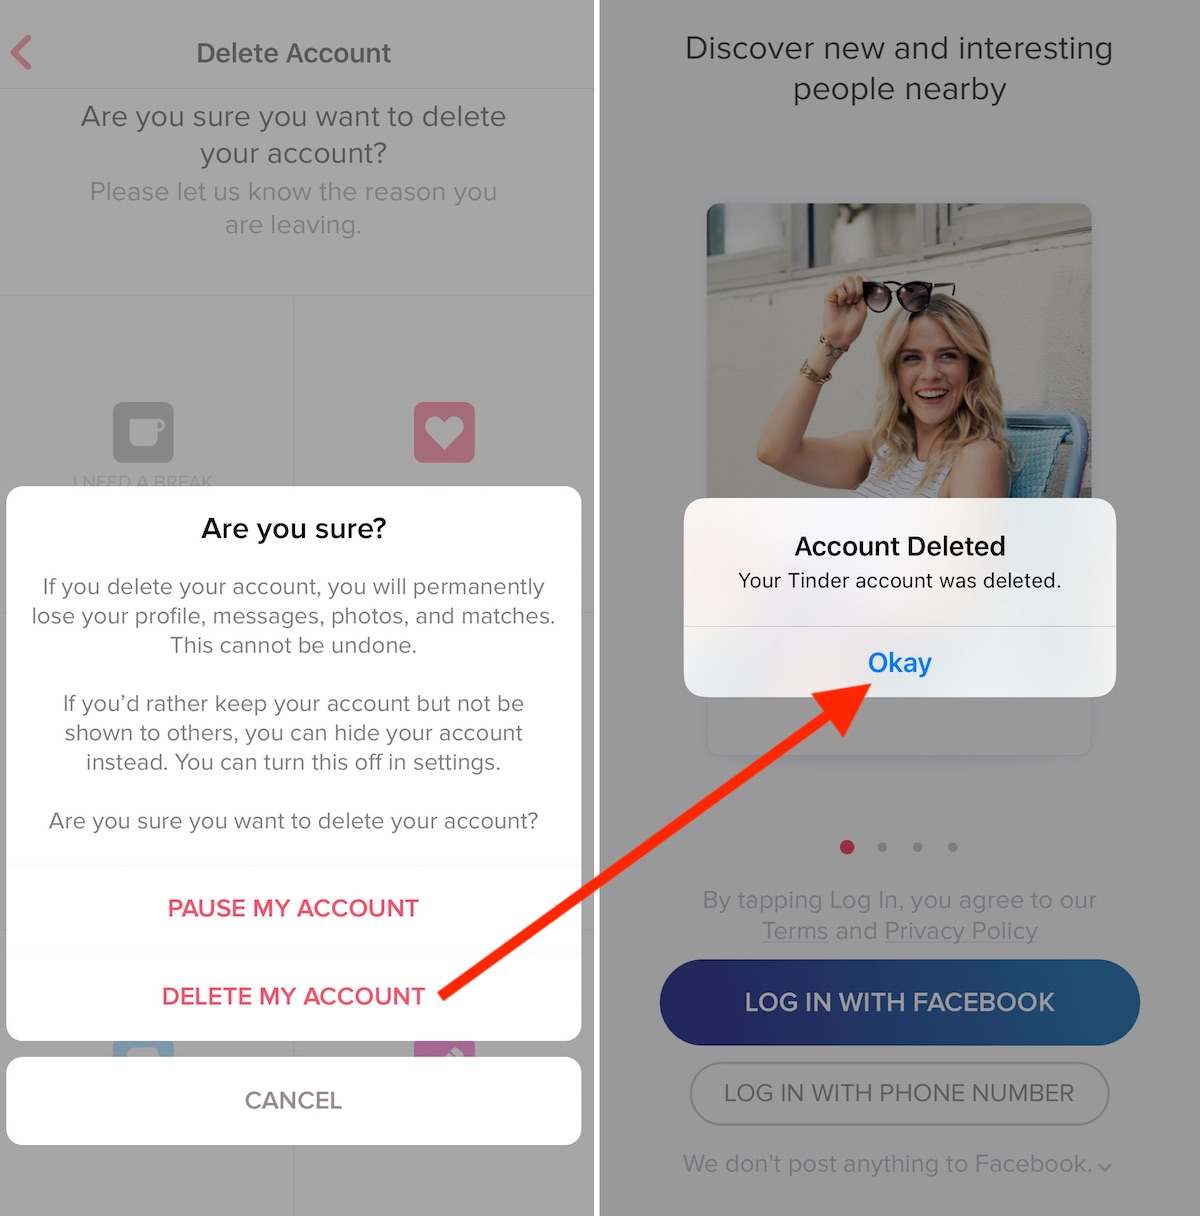 How to Cancel Tinder Plus Subscription on iOS Devices